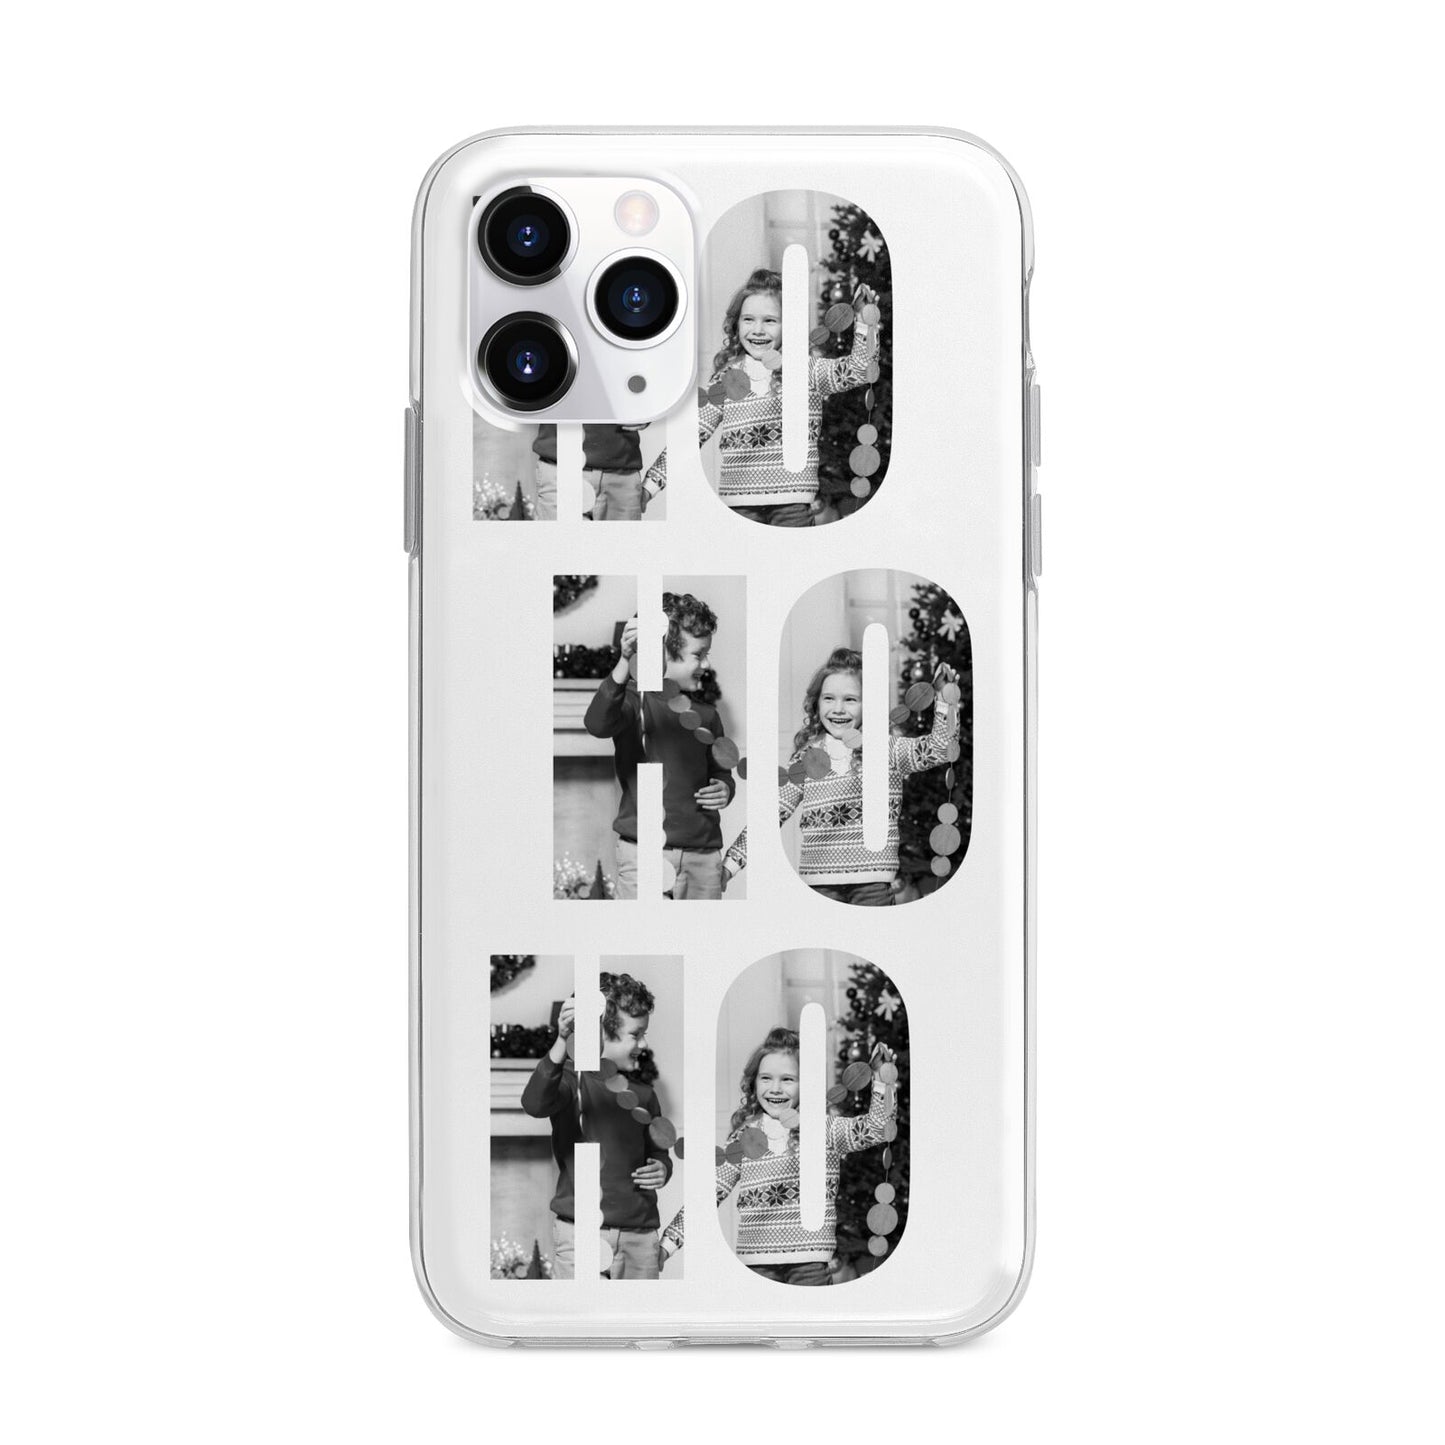 Ho Ho Ho Photo Upload Christmas Apple iPhone 11 Pro Max in Silver with Bumper Case